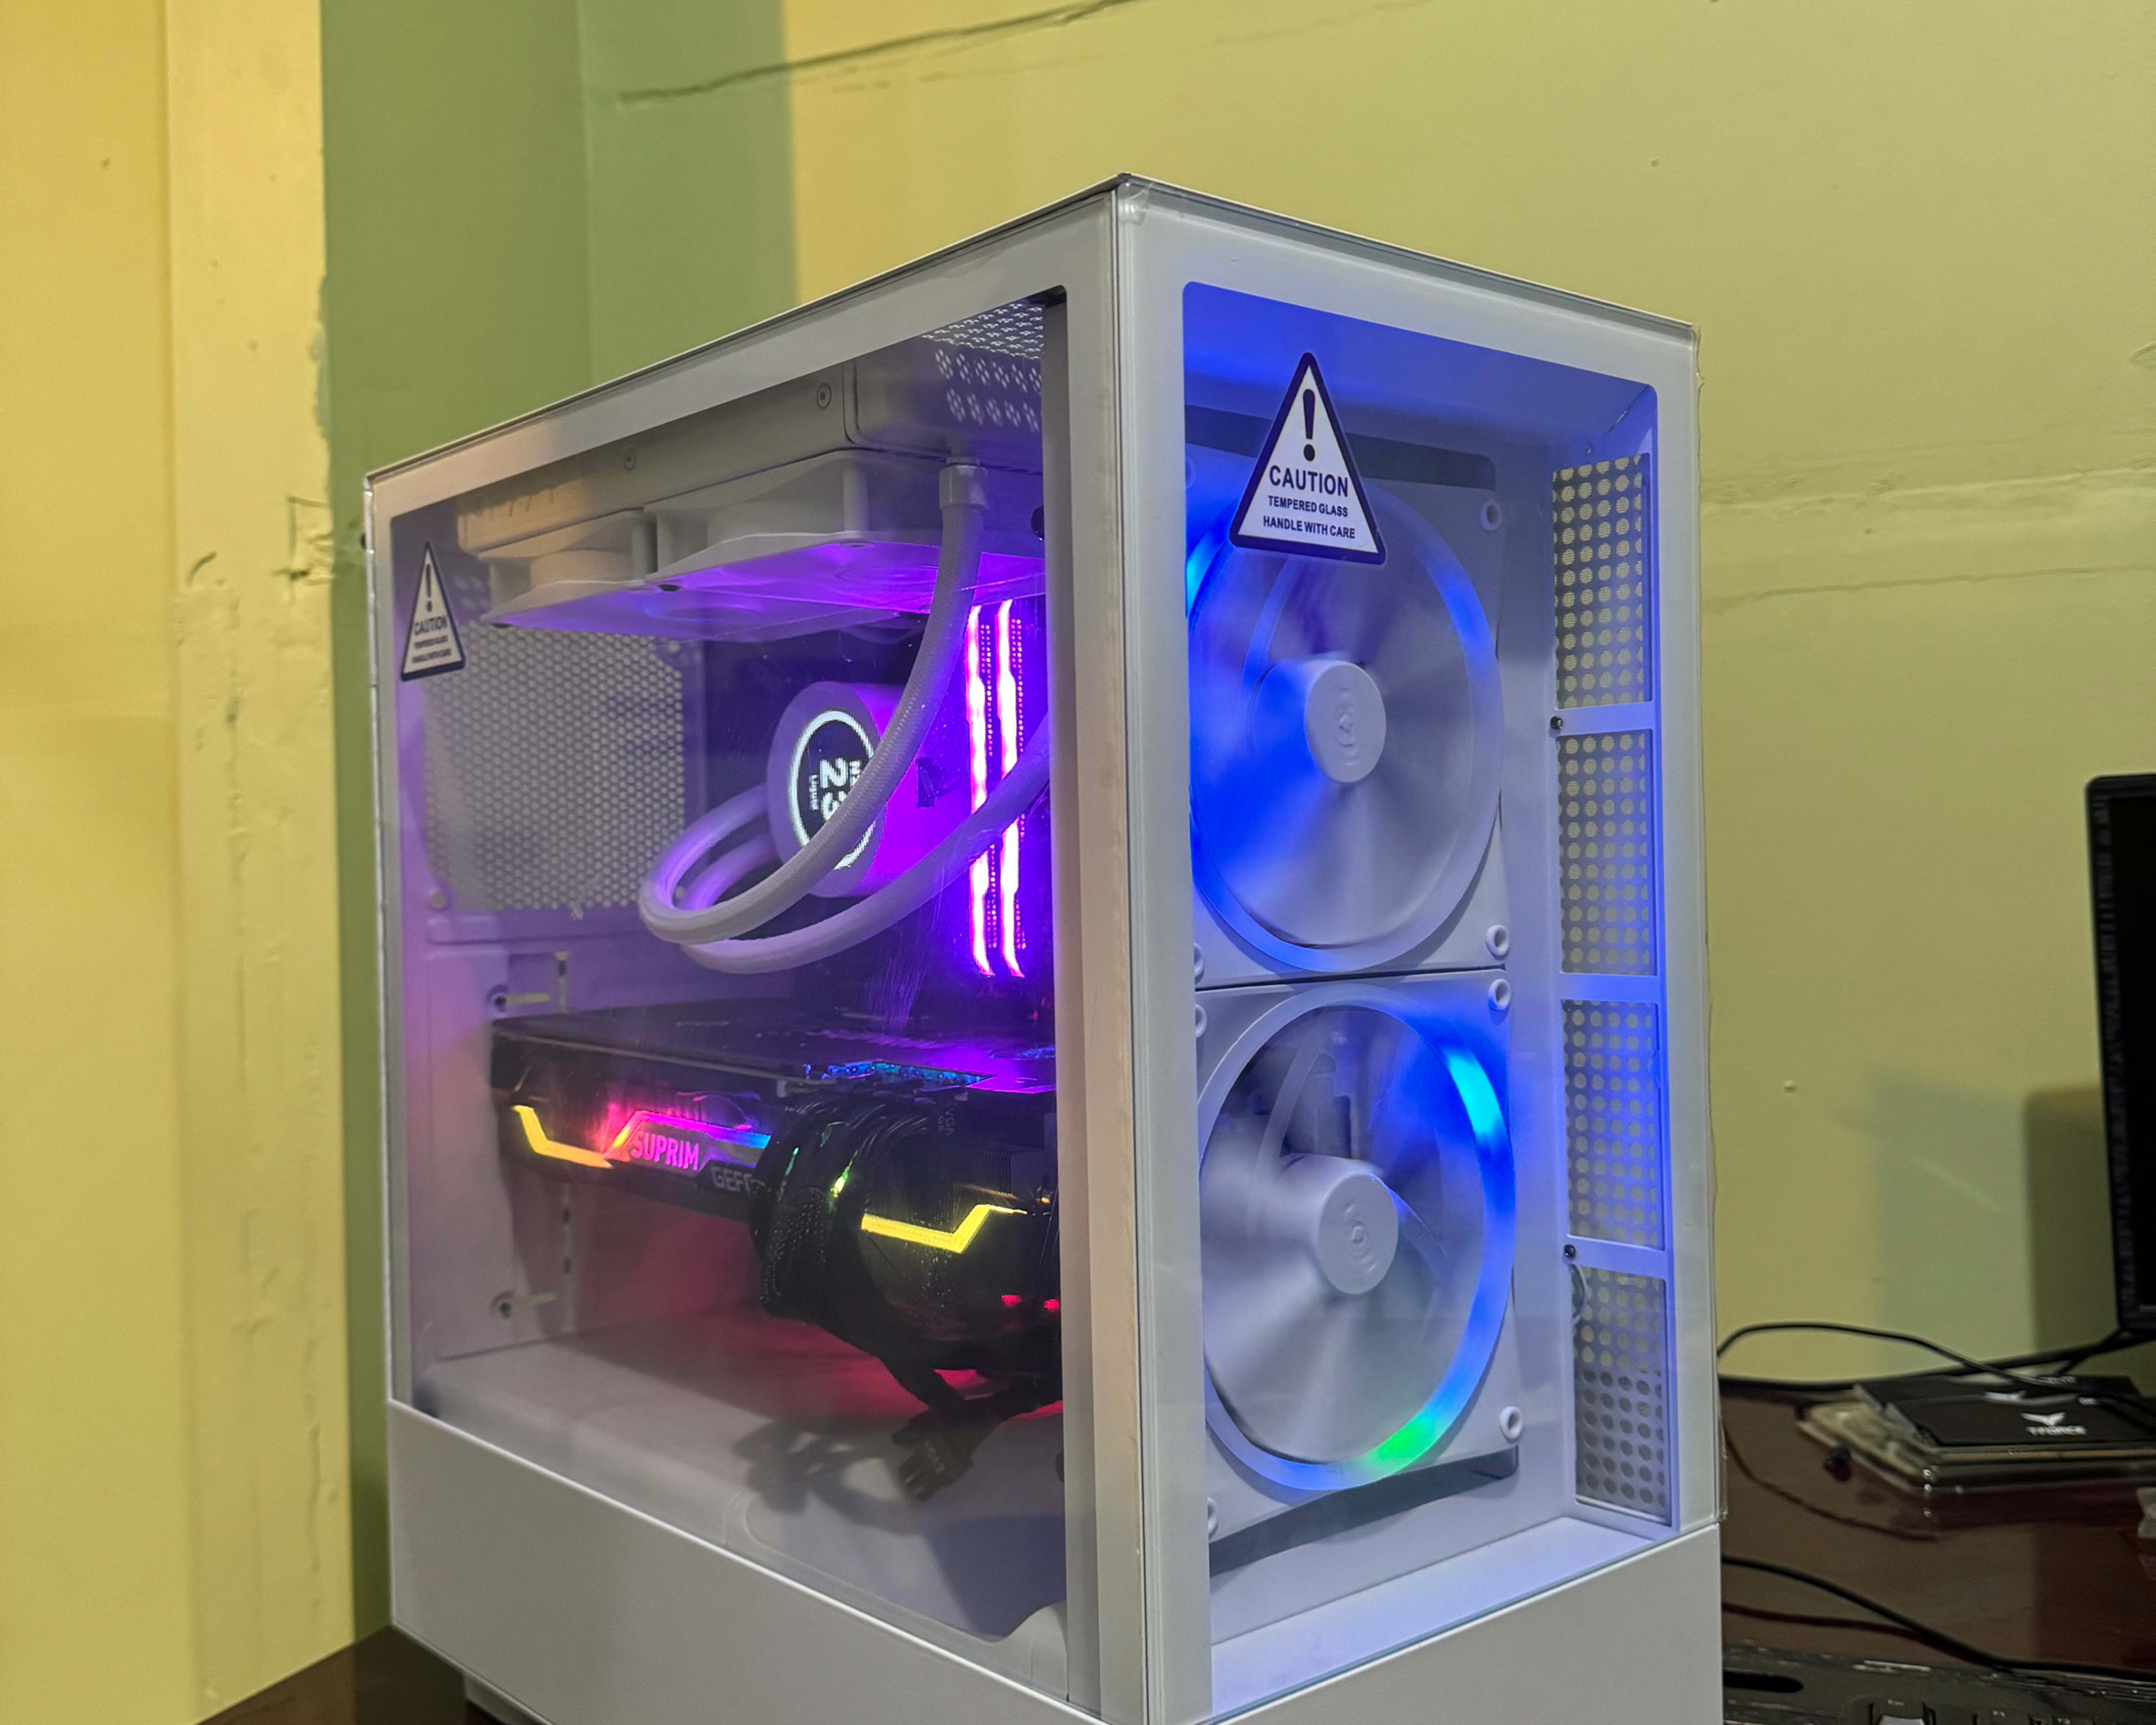 RTX 3080 GAMING PC FOR THE LOW